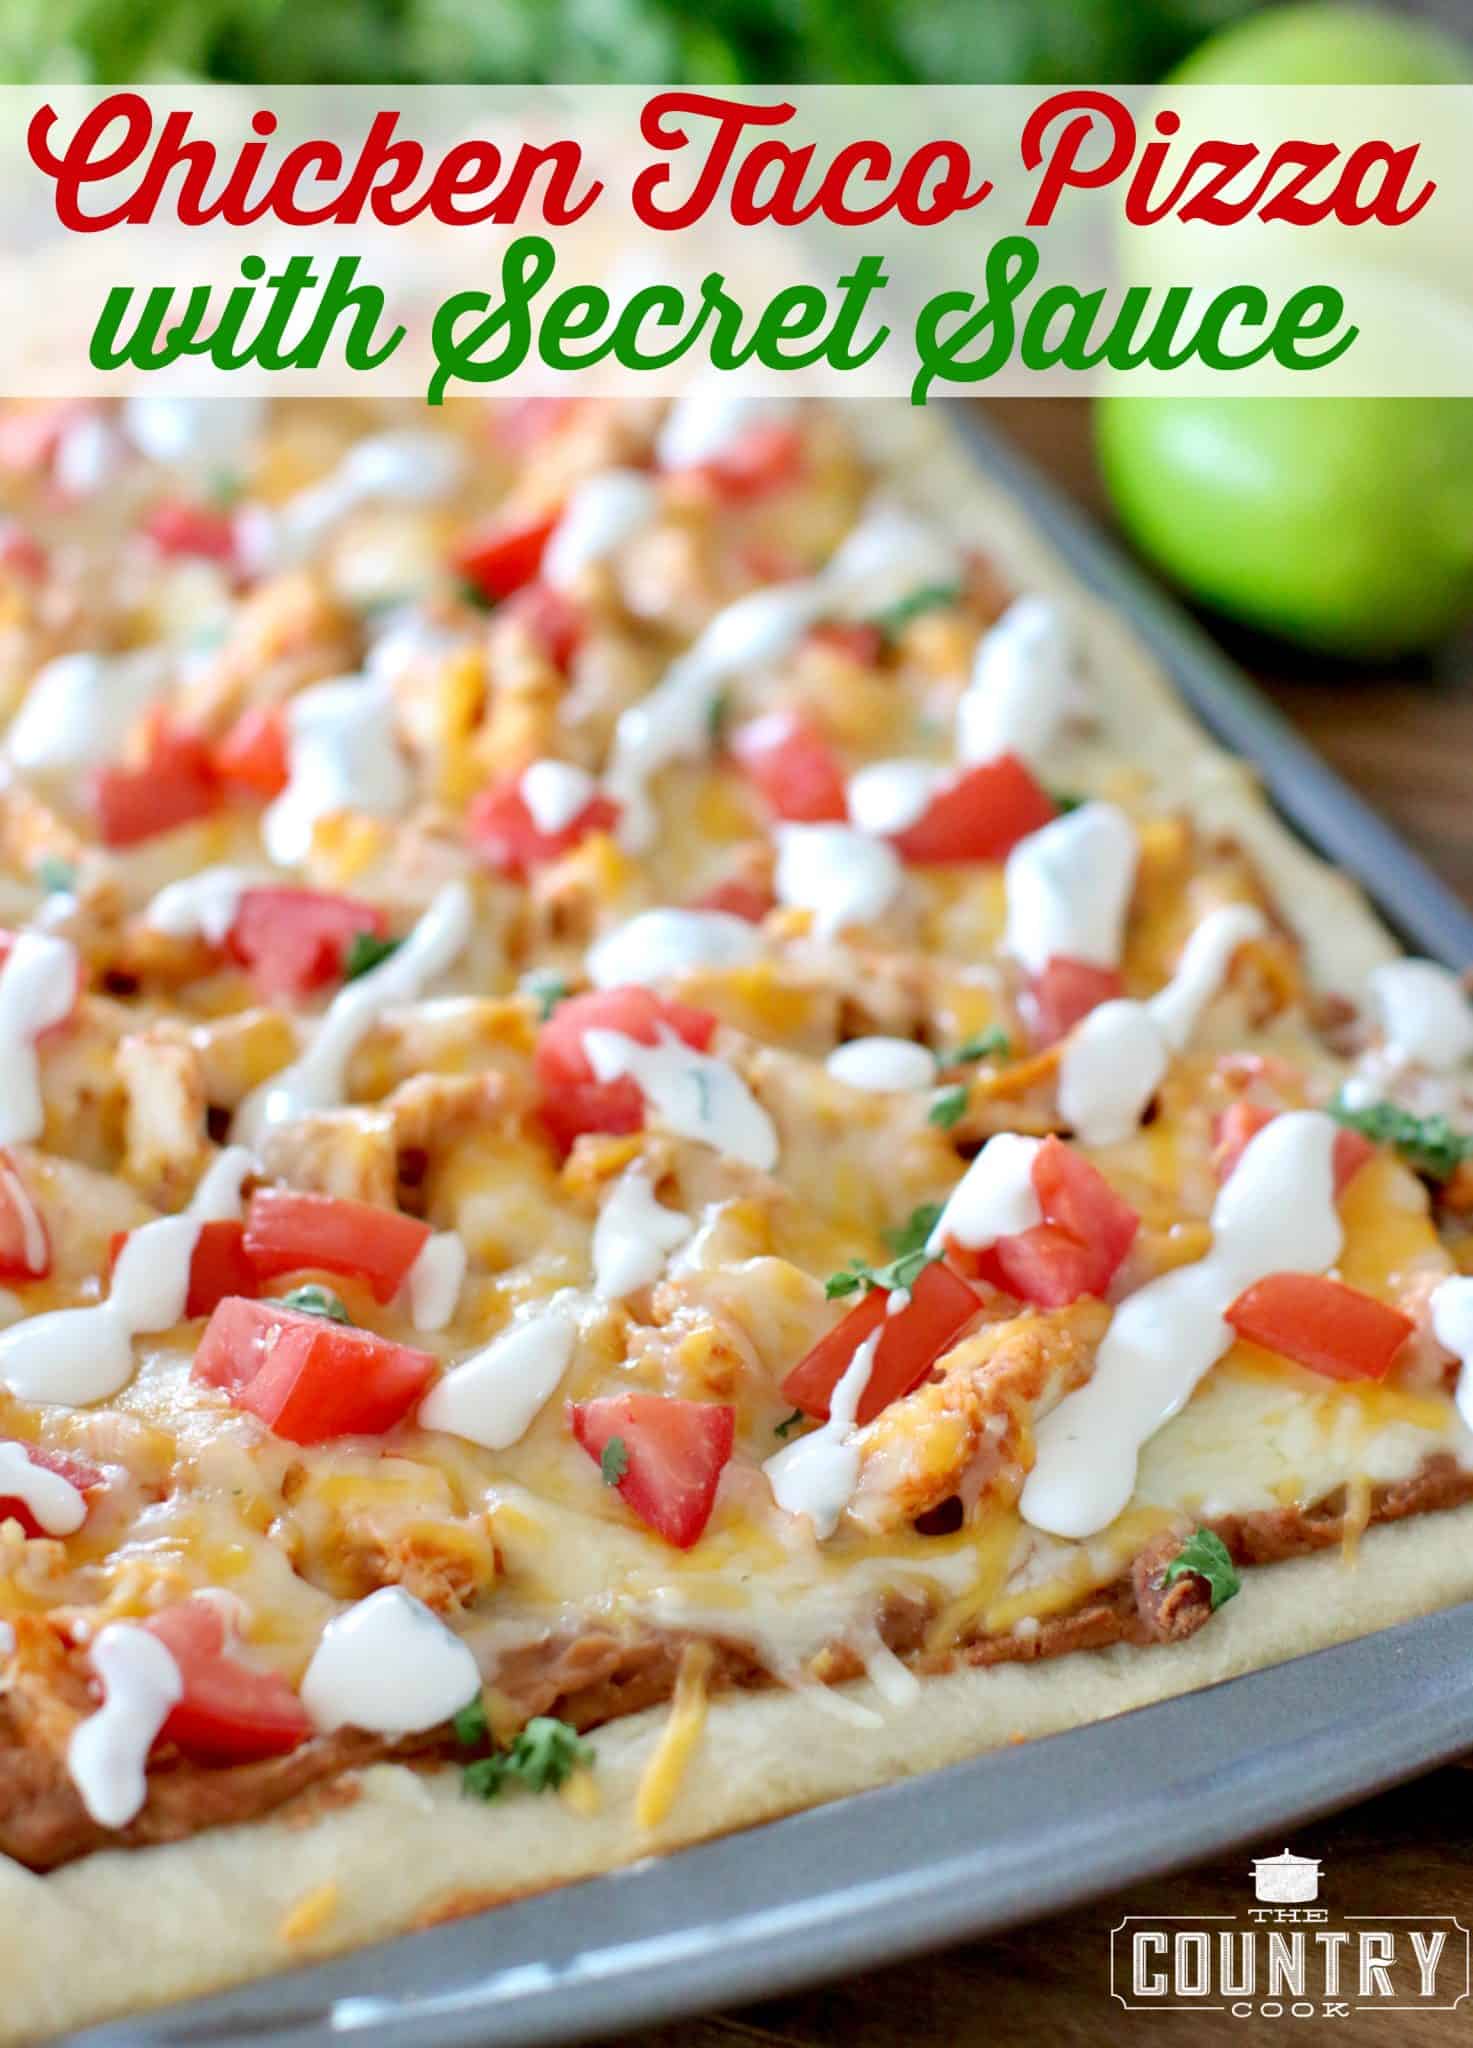 Chicken Taco Pizza with Secret Sauce